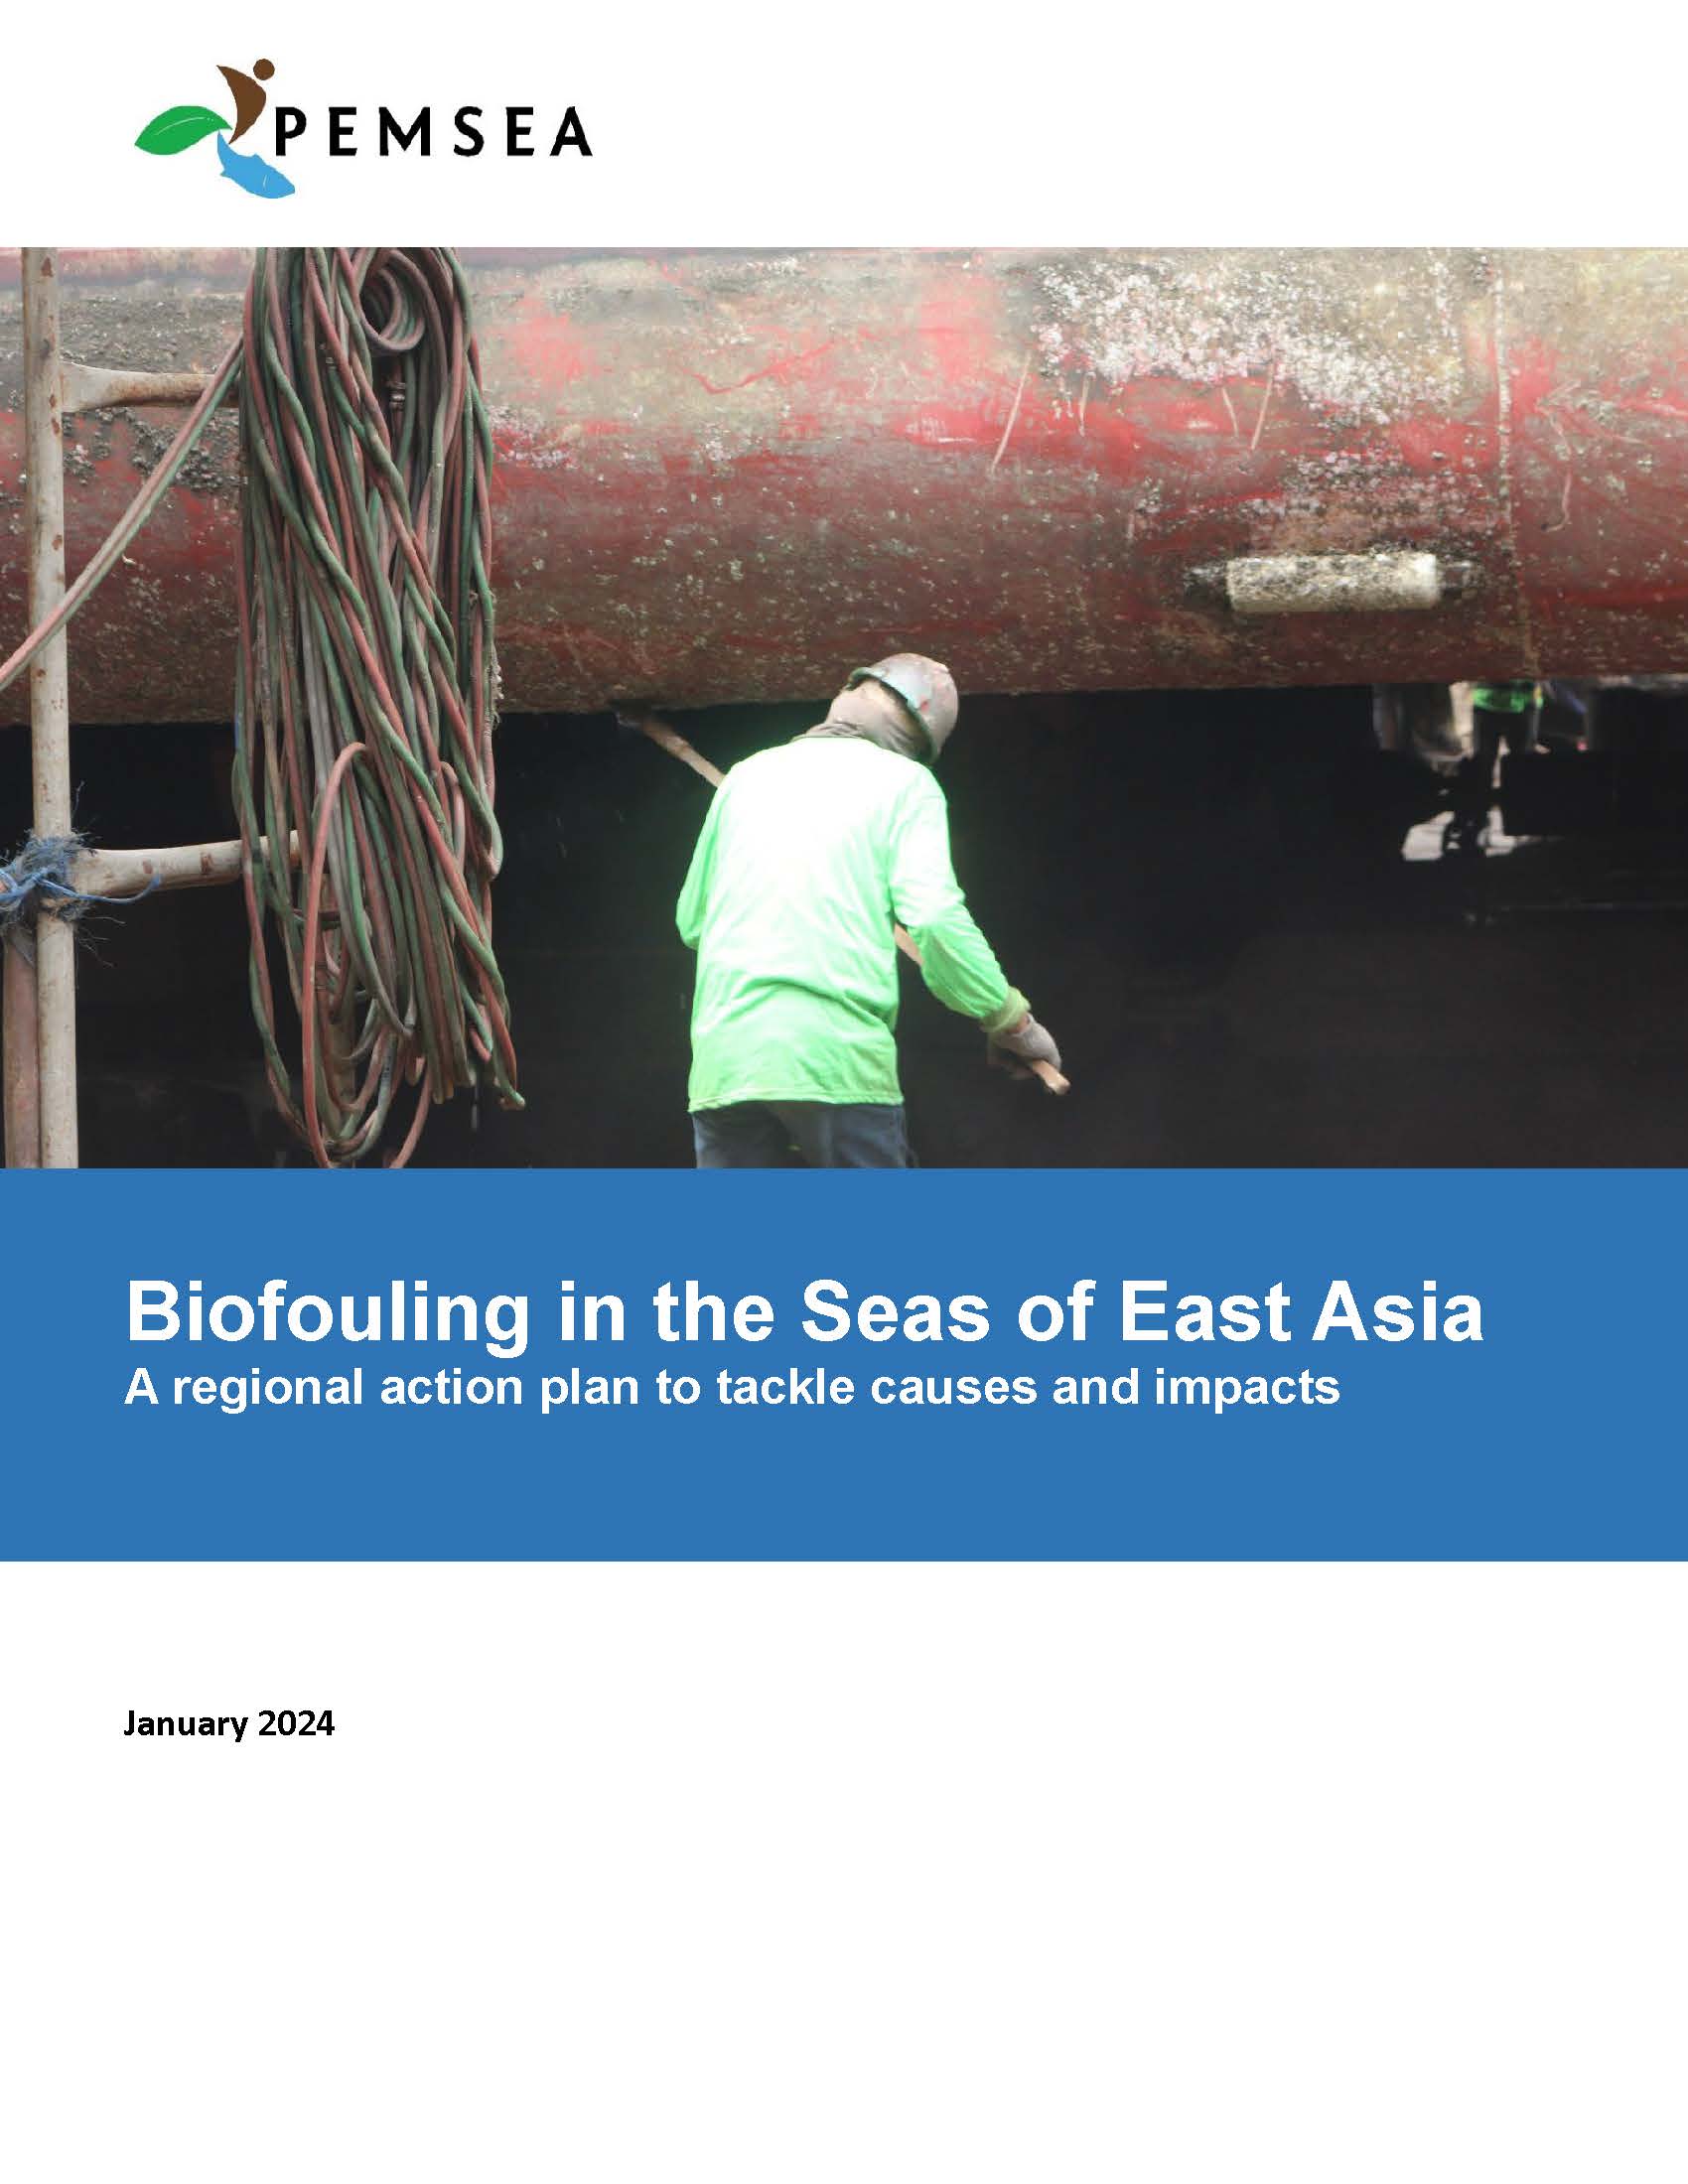 Biofouling in the Seas of East Asia